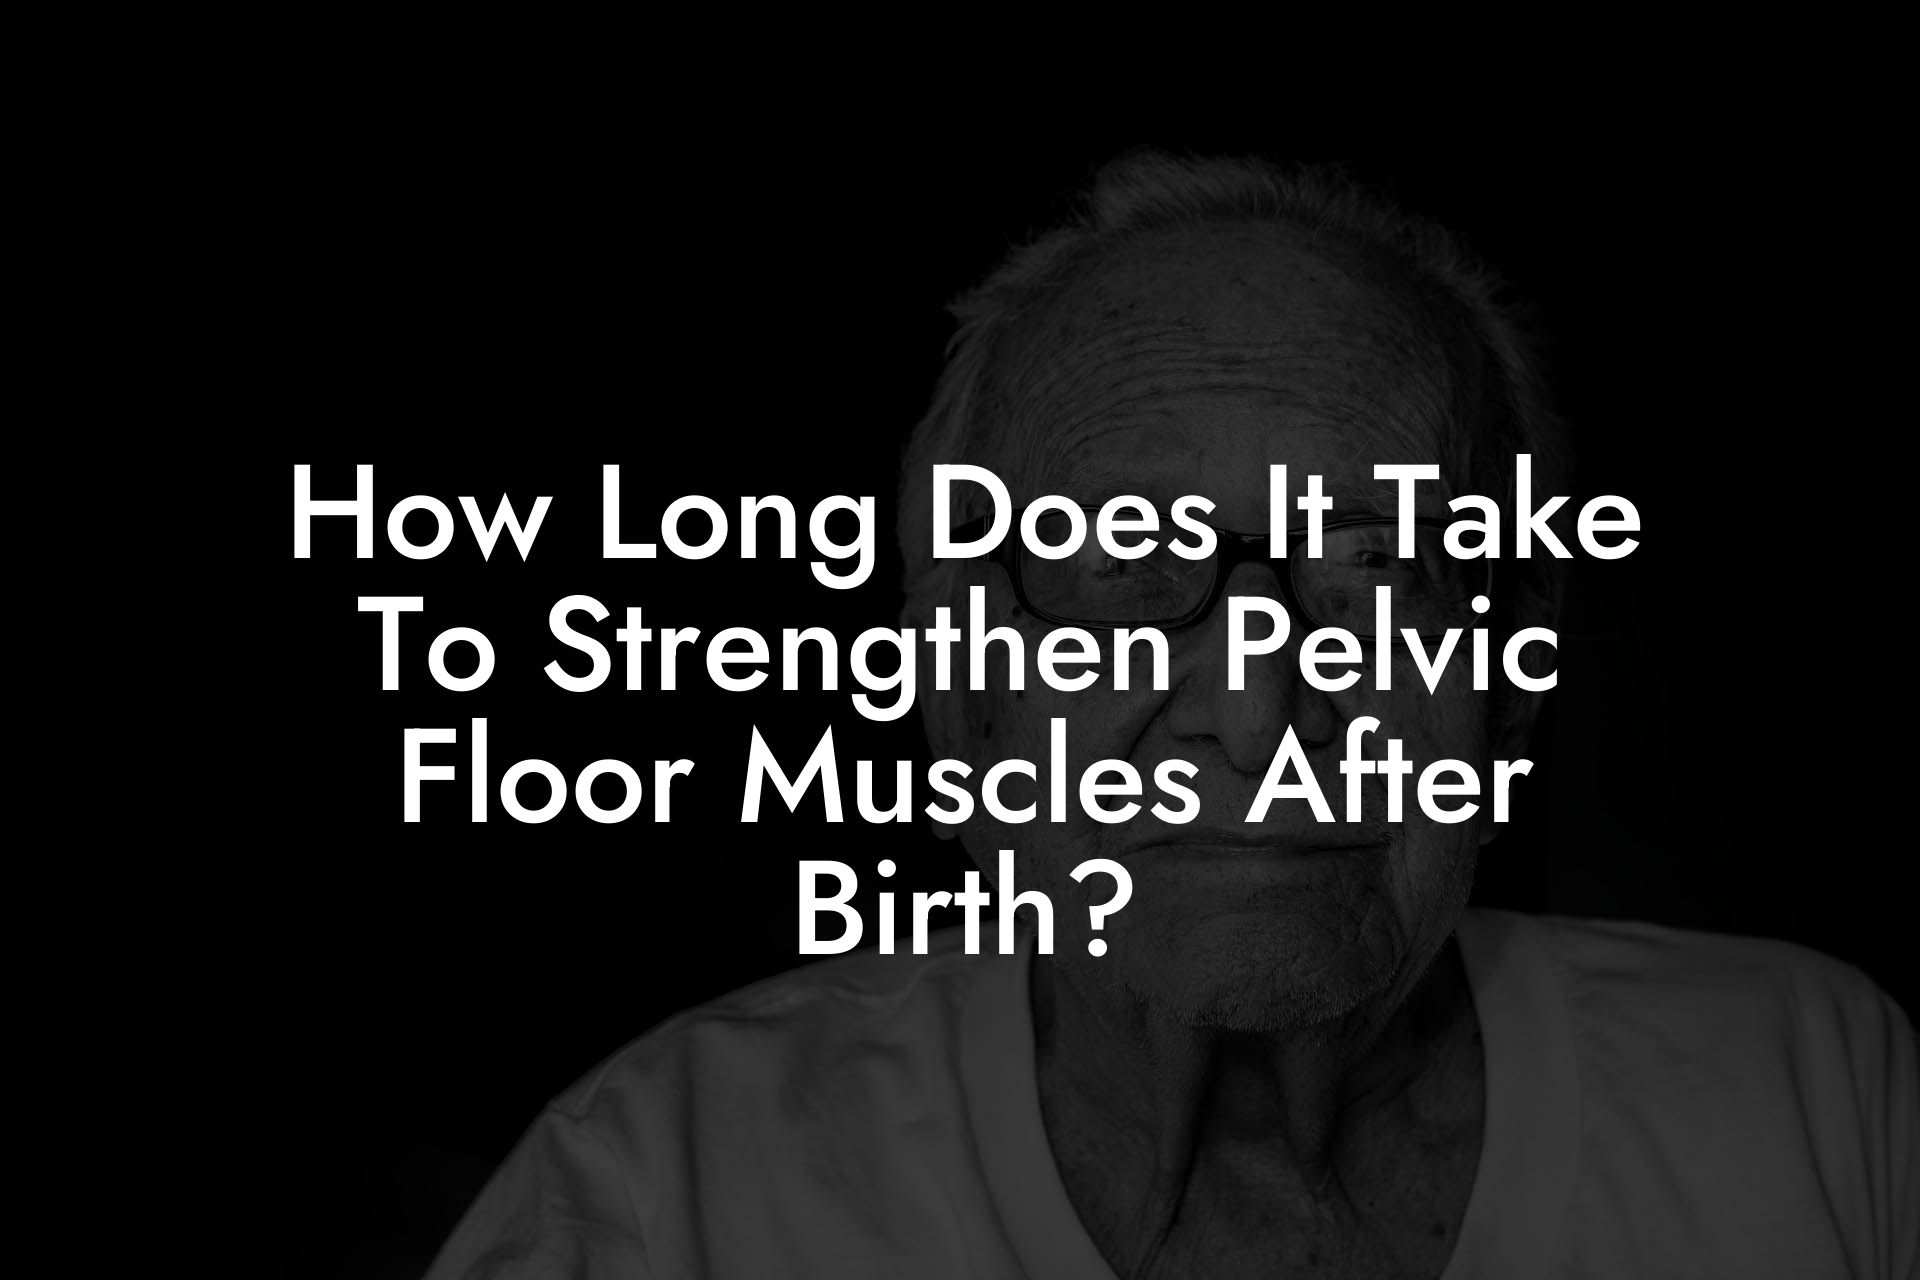 How Long Does It Take To Strengthen Pelvic Floor Muscles After Birth?